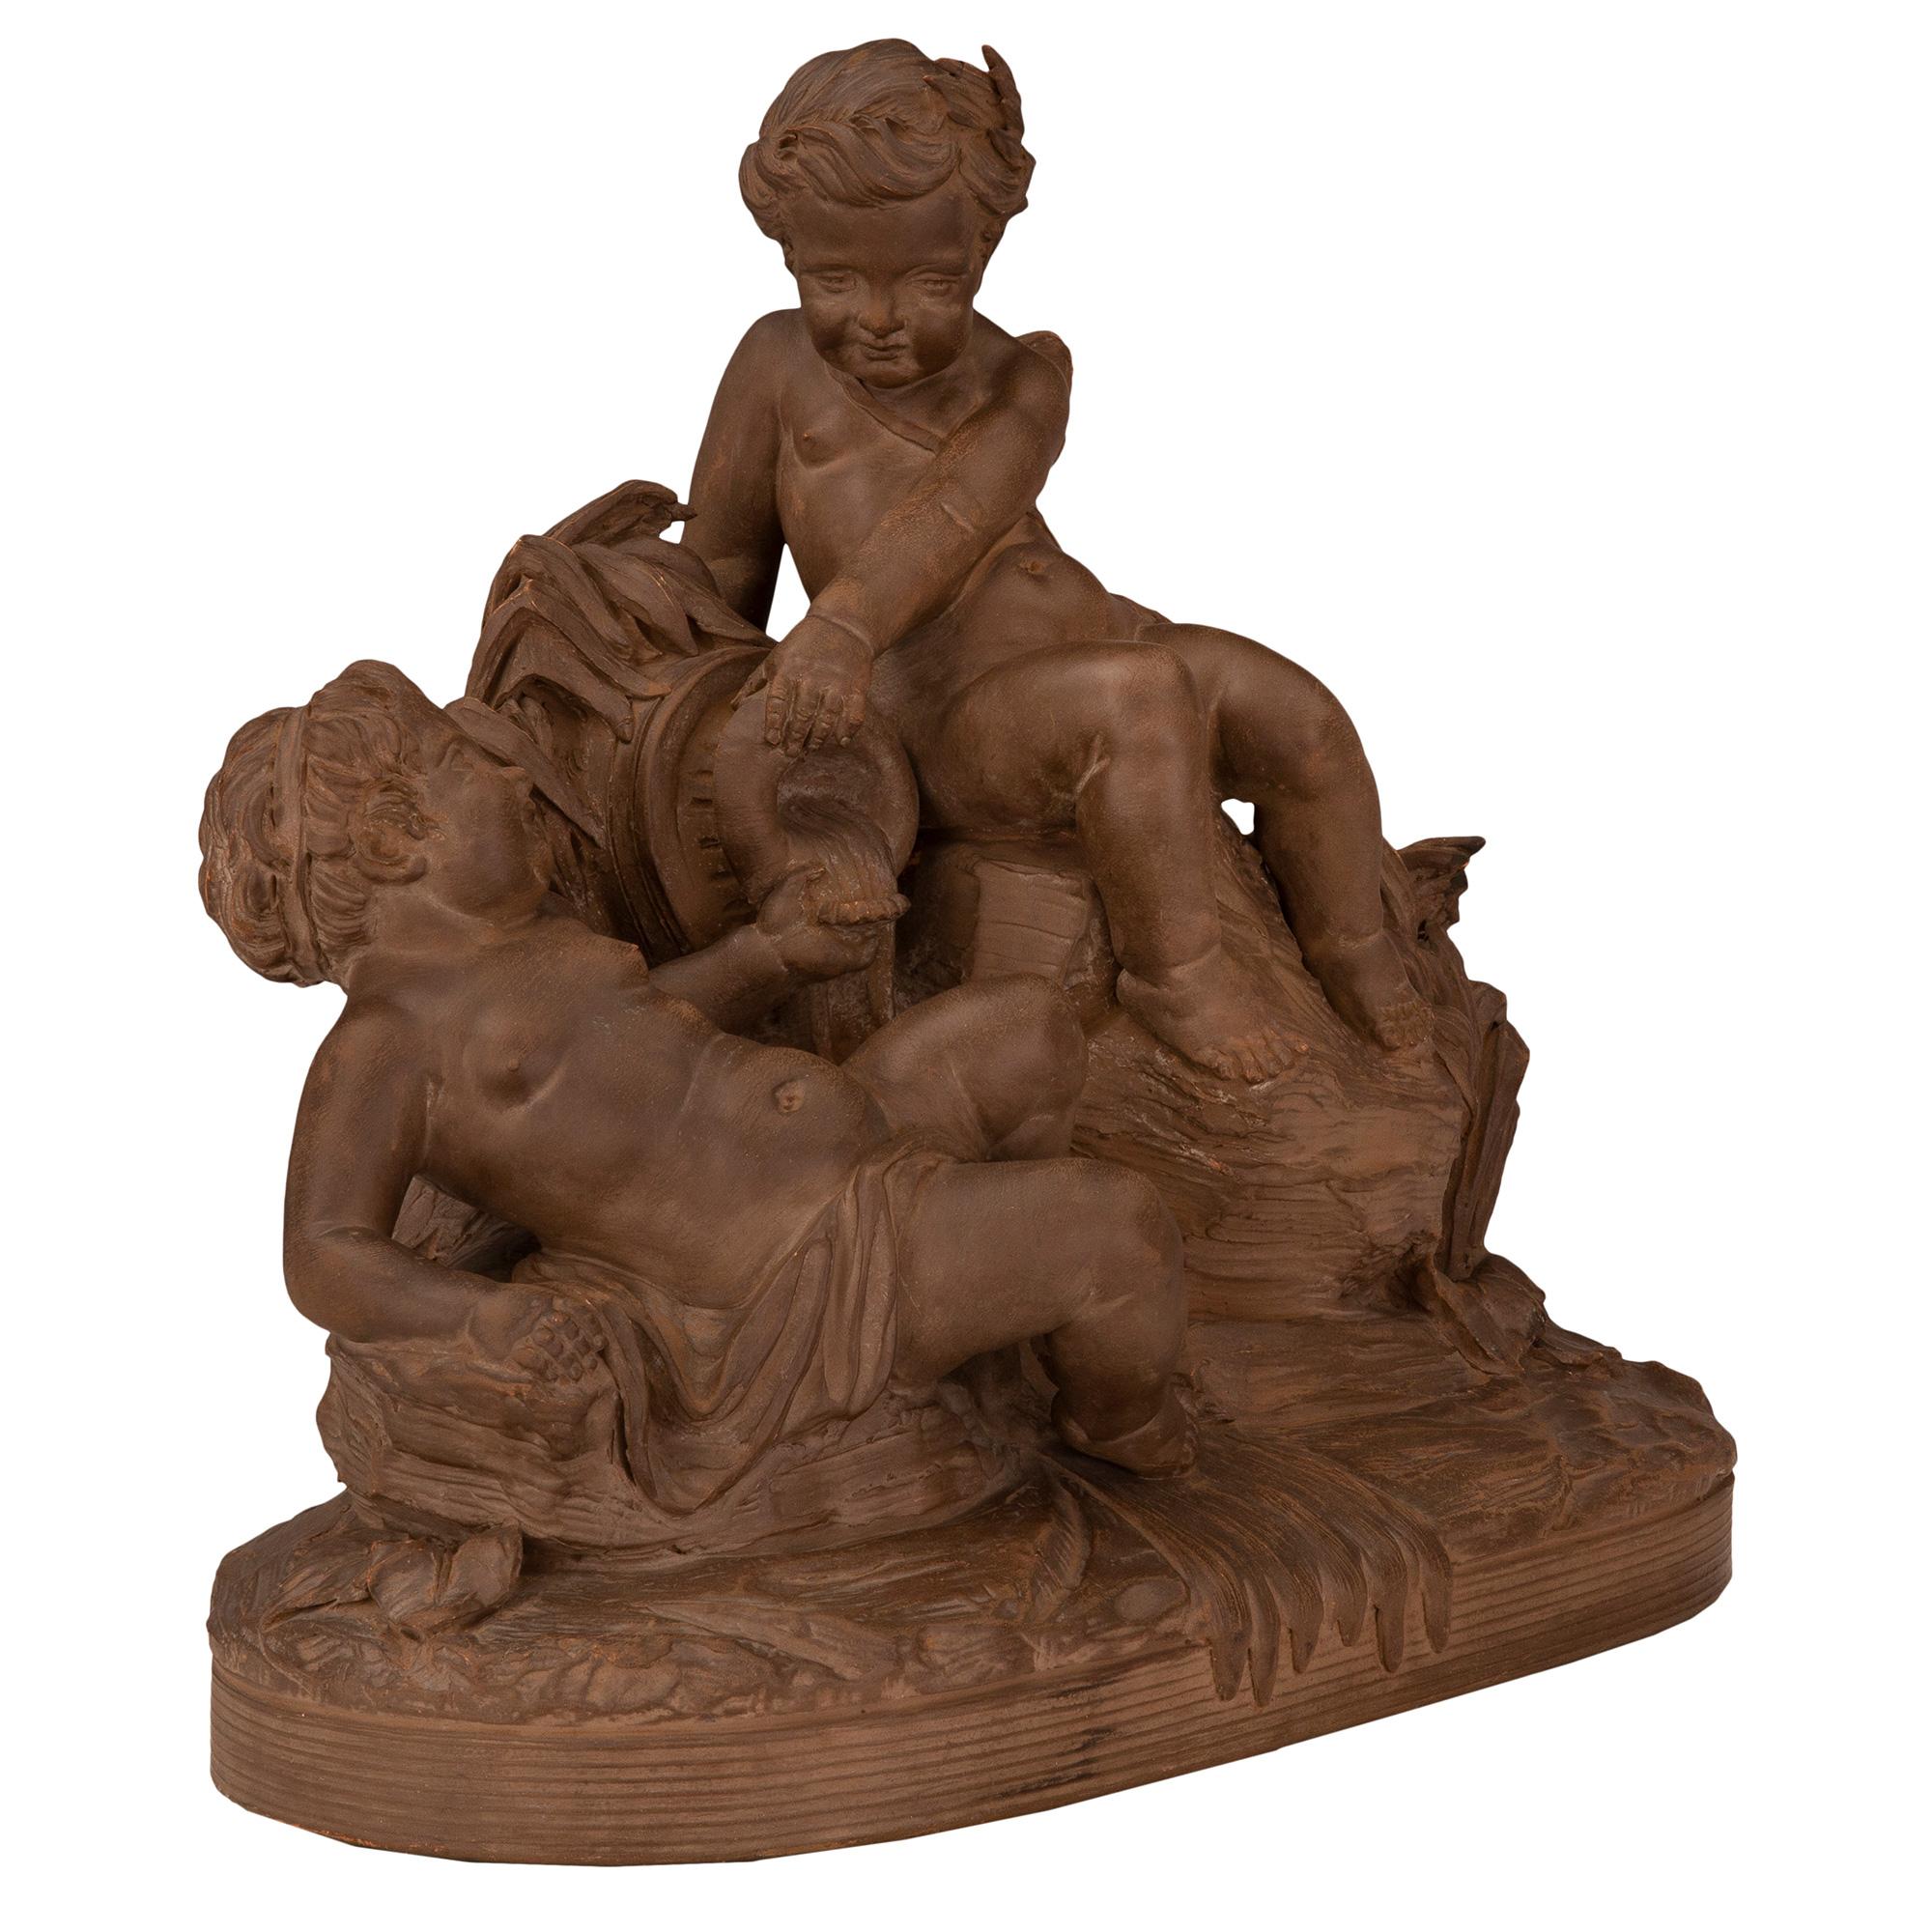 A beautiful and most charming French 19th century terra cotta statue. The statue is raised by a fine oblong base with a lovely wrap around design. Above are two charming winged cherubs seated on rocks pouring water out from a vessel amidst finely